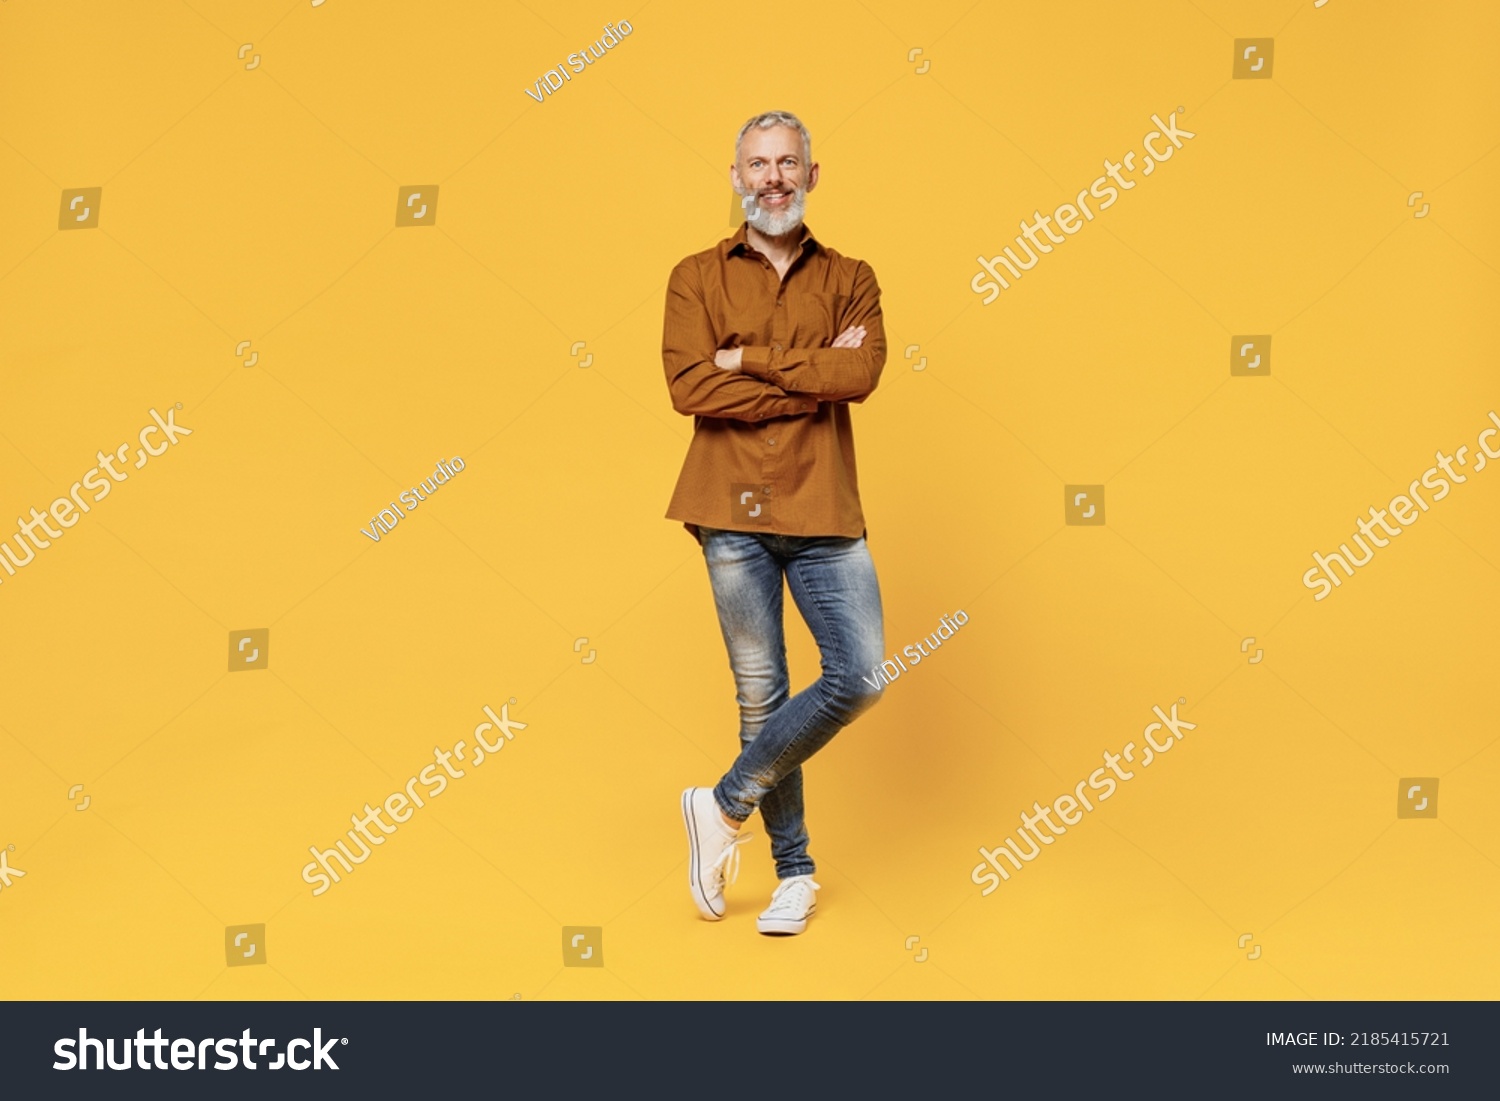 Full size body length excited charismatic elderly gray-haired bearded man 40s years old wears brown shirt looking camera smiling keep hands crossed isolated on plain yellow background studio portrait #2185415721